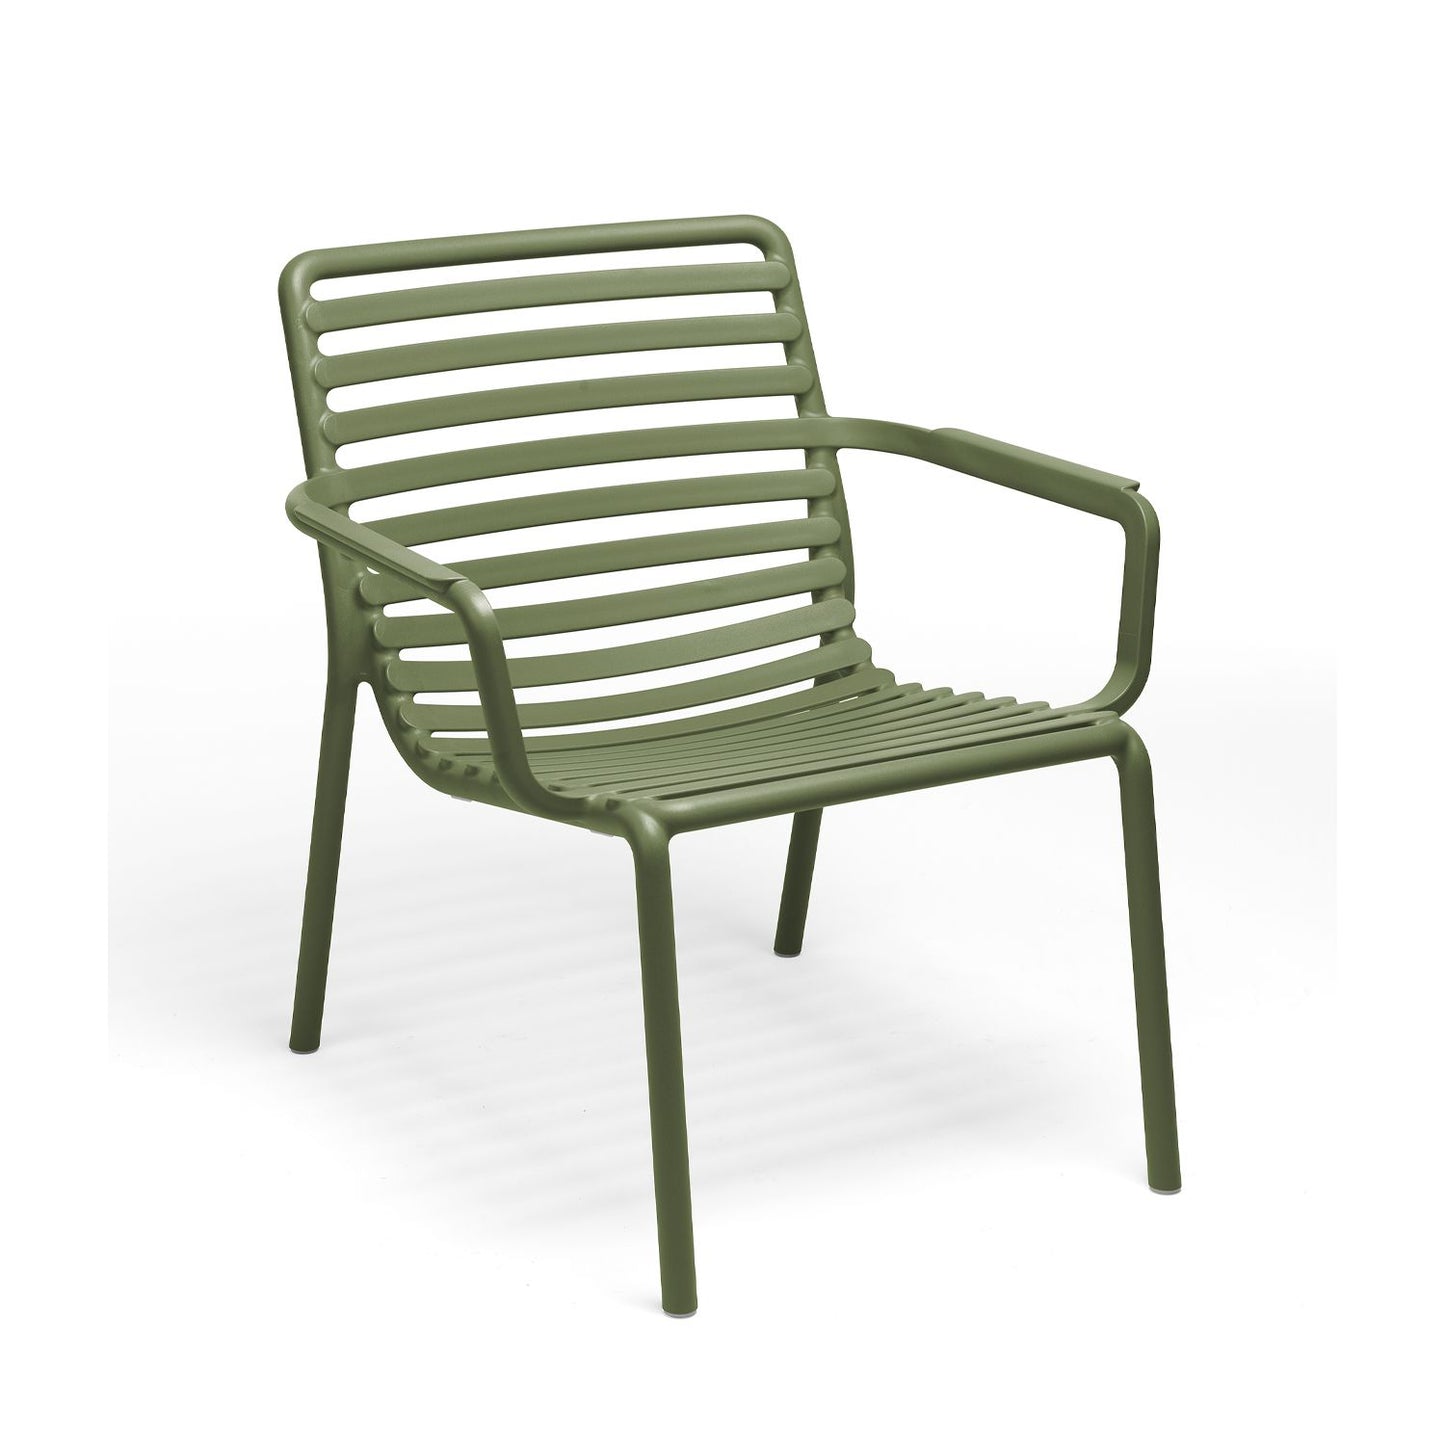 Doga Relax Garden Chair By Nardi - Set Of 4 - Olive